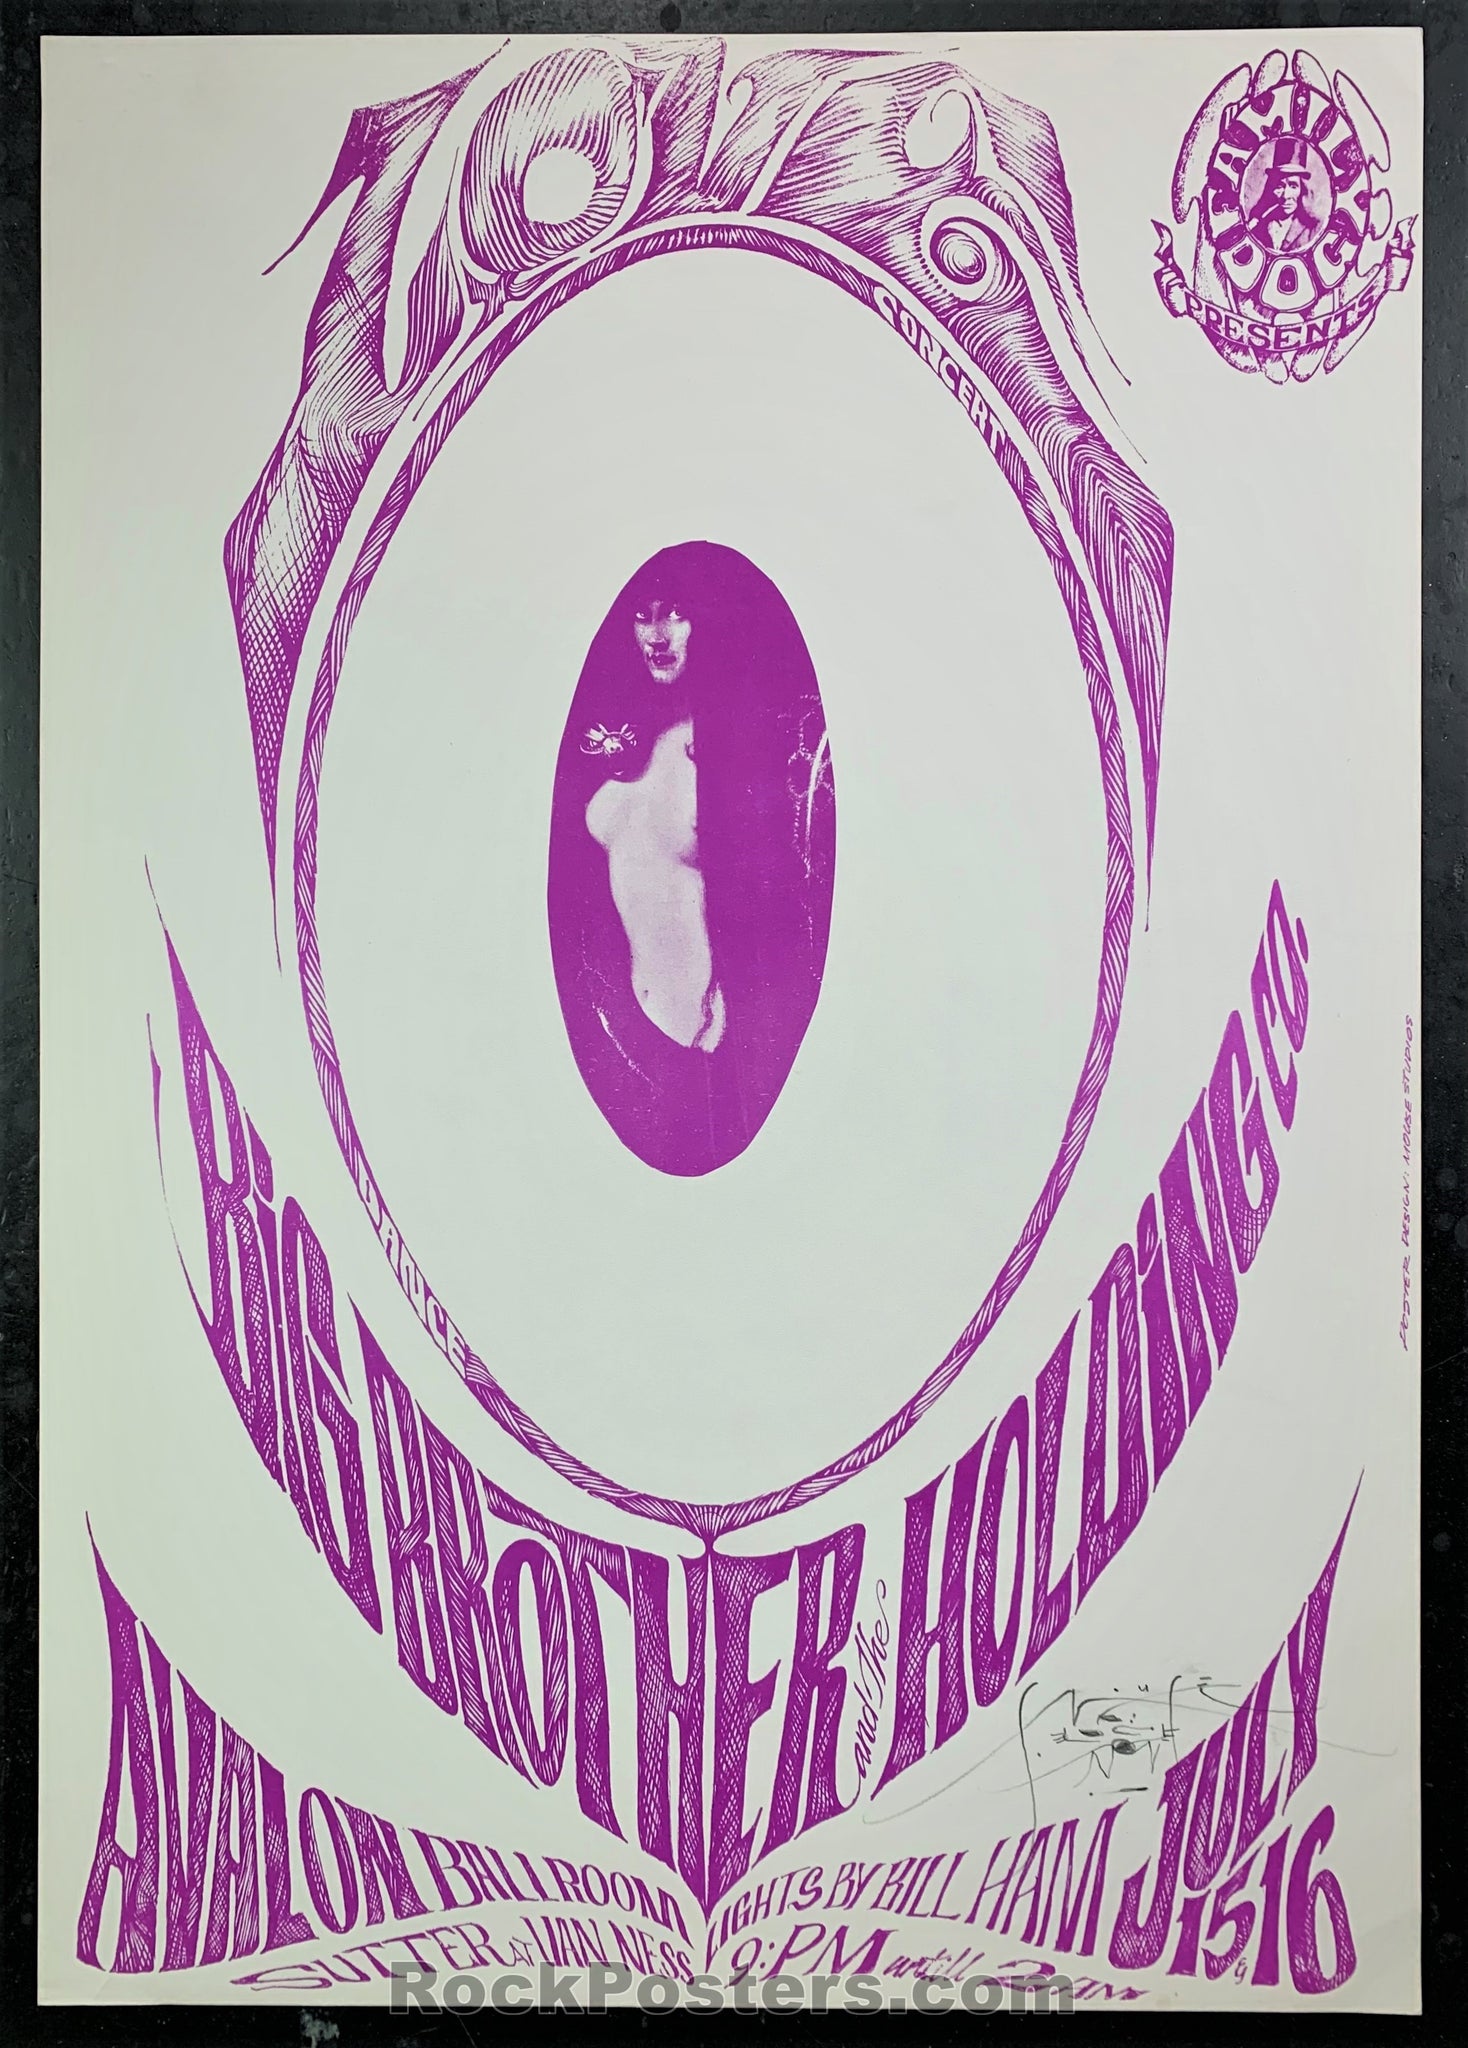 AUCTION - FD-17A - Big Brother 1966 Poster- Mouse Signed - Avalon Ballroom - Near Mint